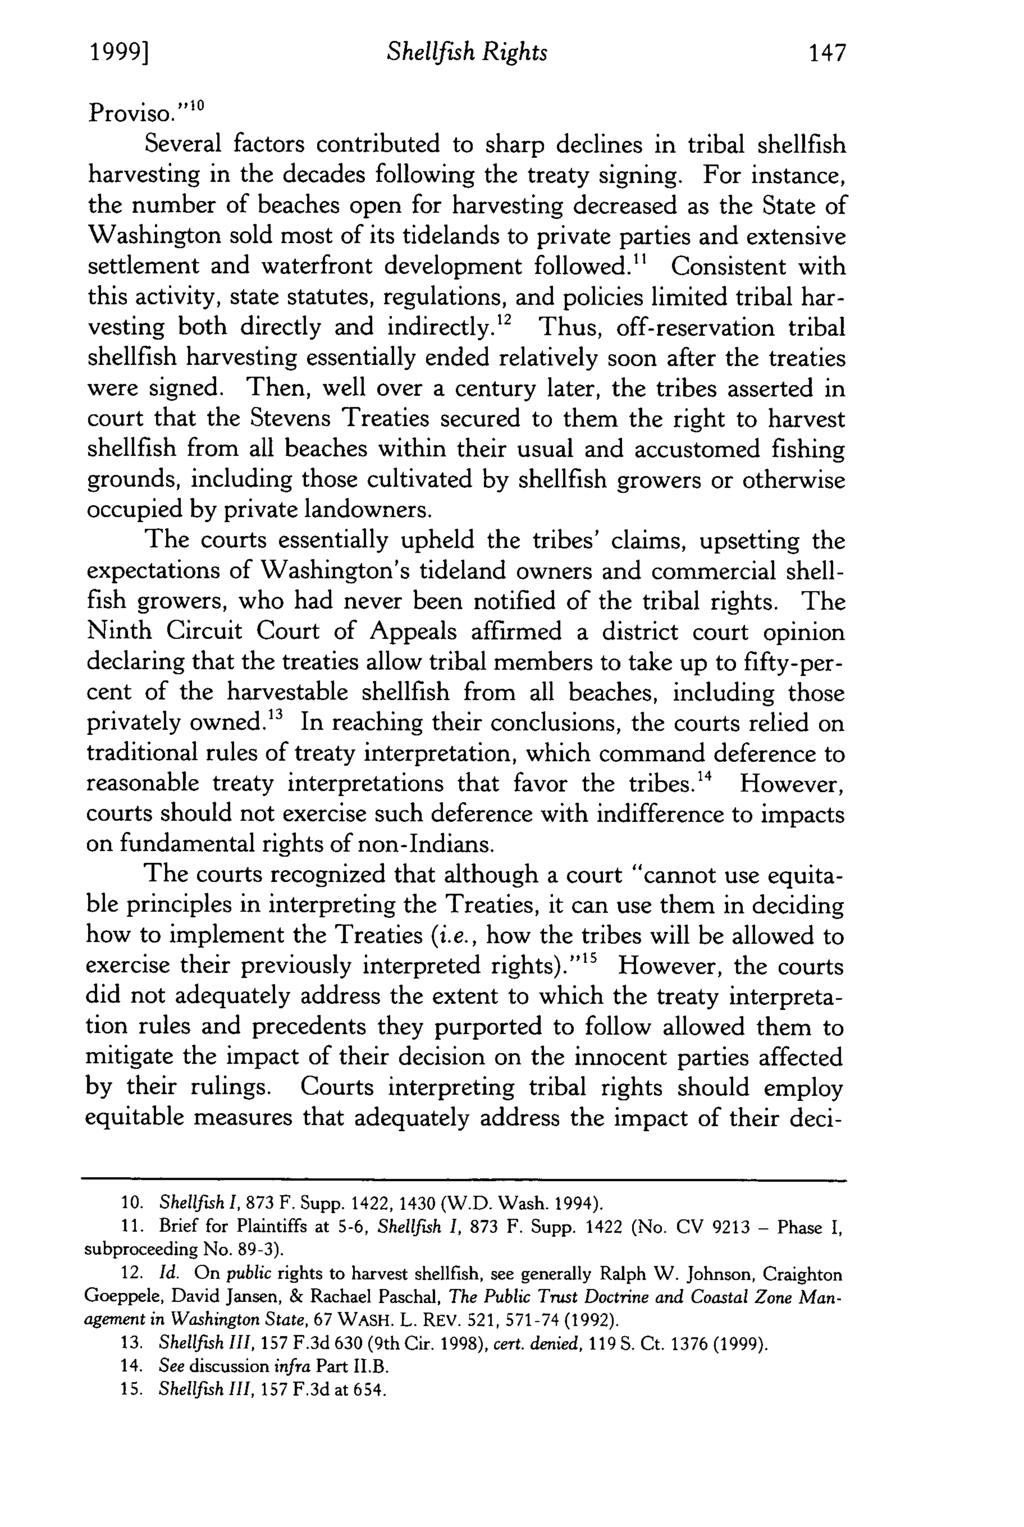 1999] Shellfsh Rights Proviso."10 Several factors contributed to sharp declines in tribal shellfish harvesting in the decades following the treaty signing.